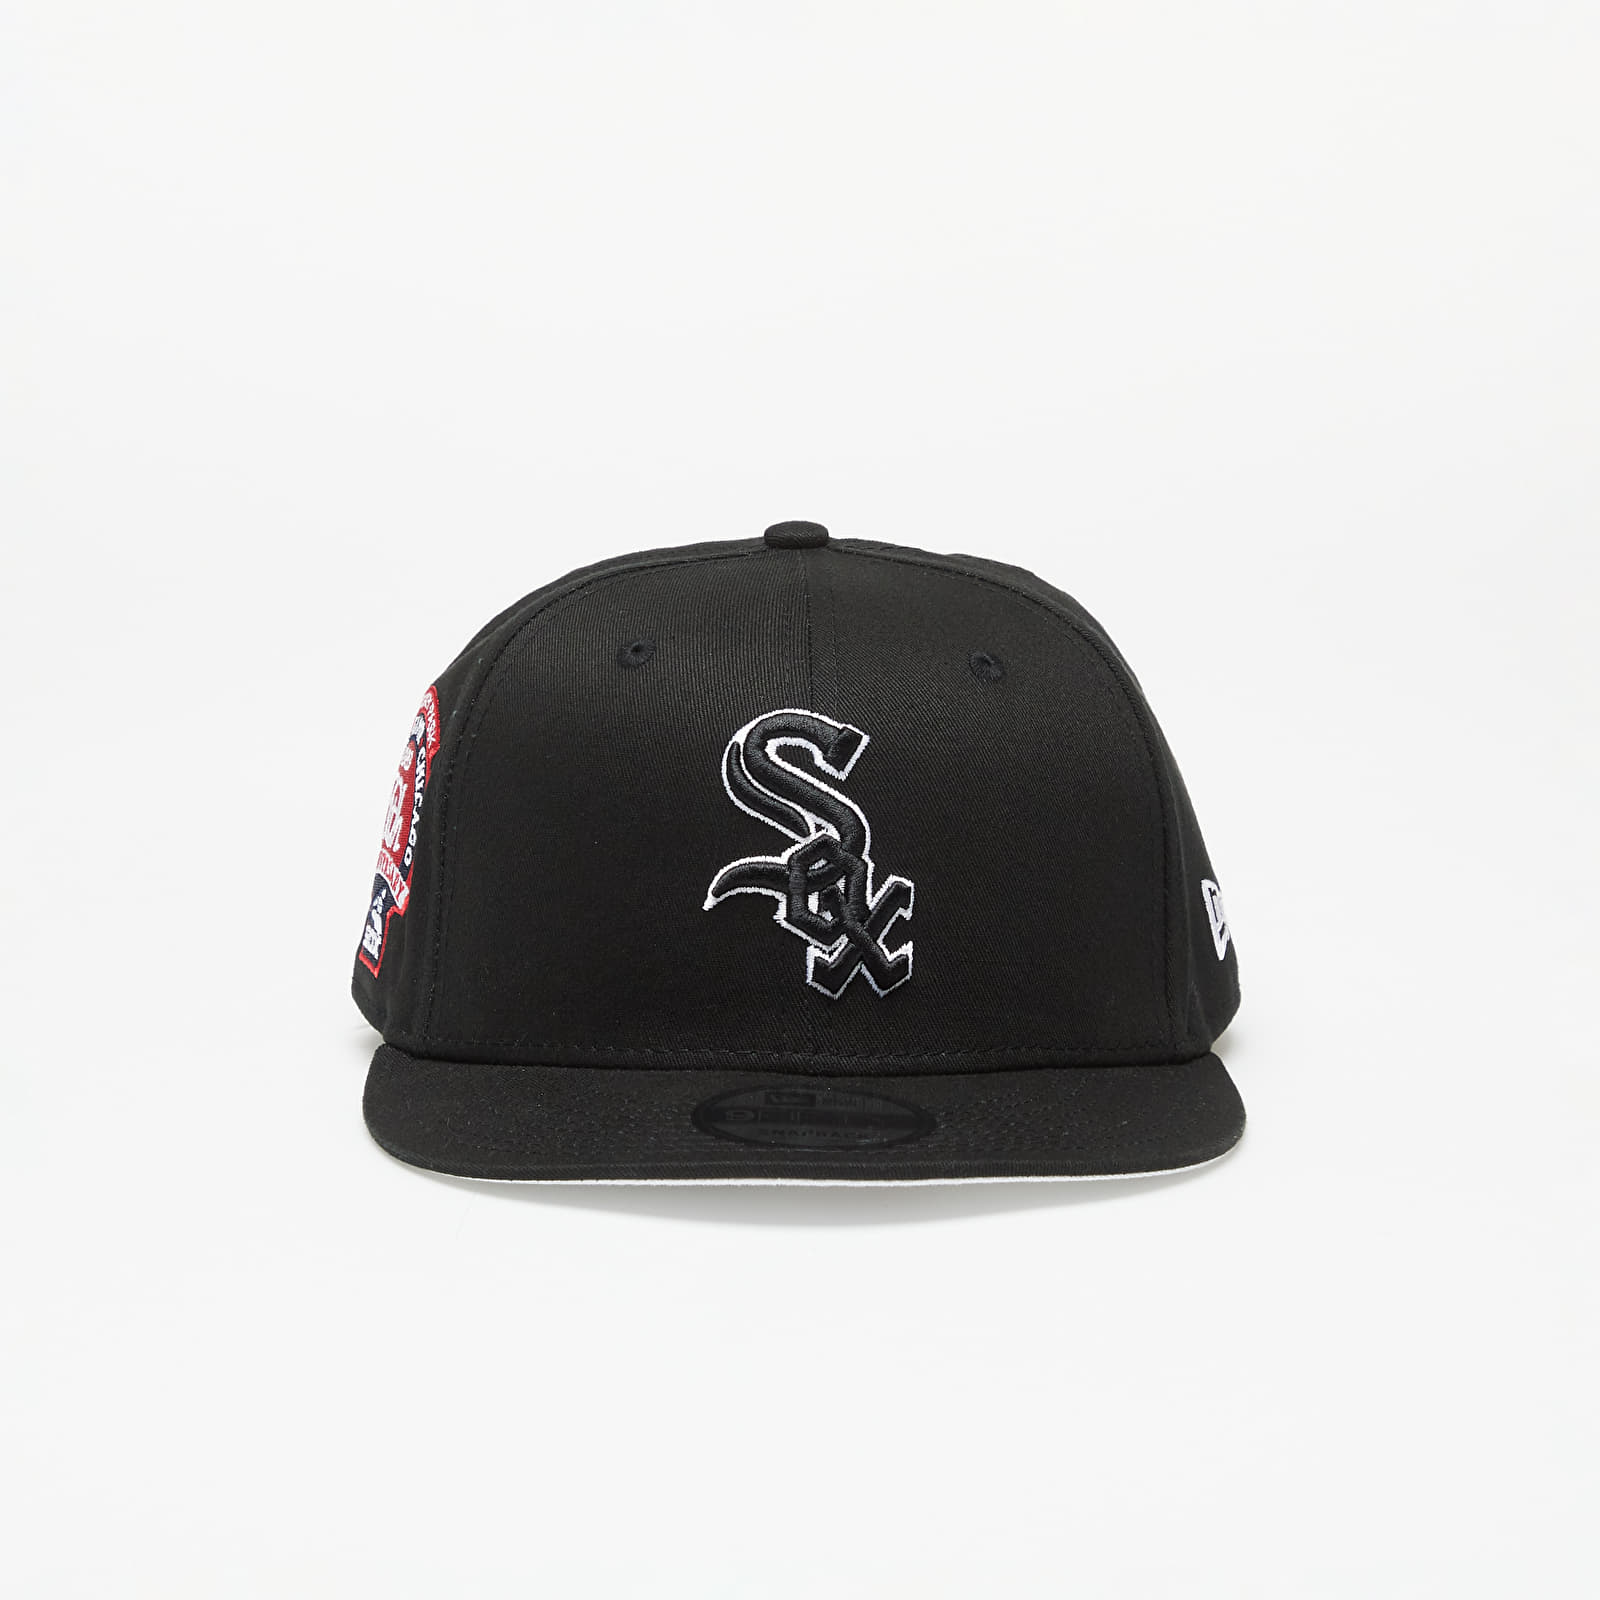 Caps New Era Chicago White Sox Side Patch 9FIFTY Snapback Cap Black/ White